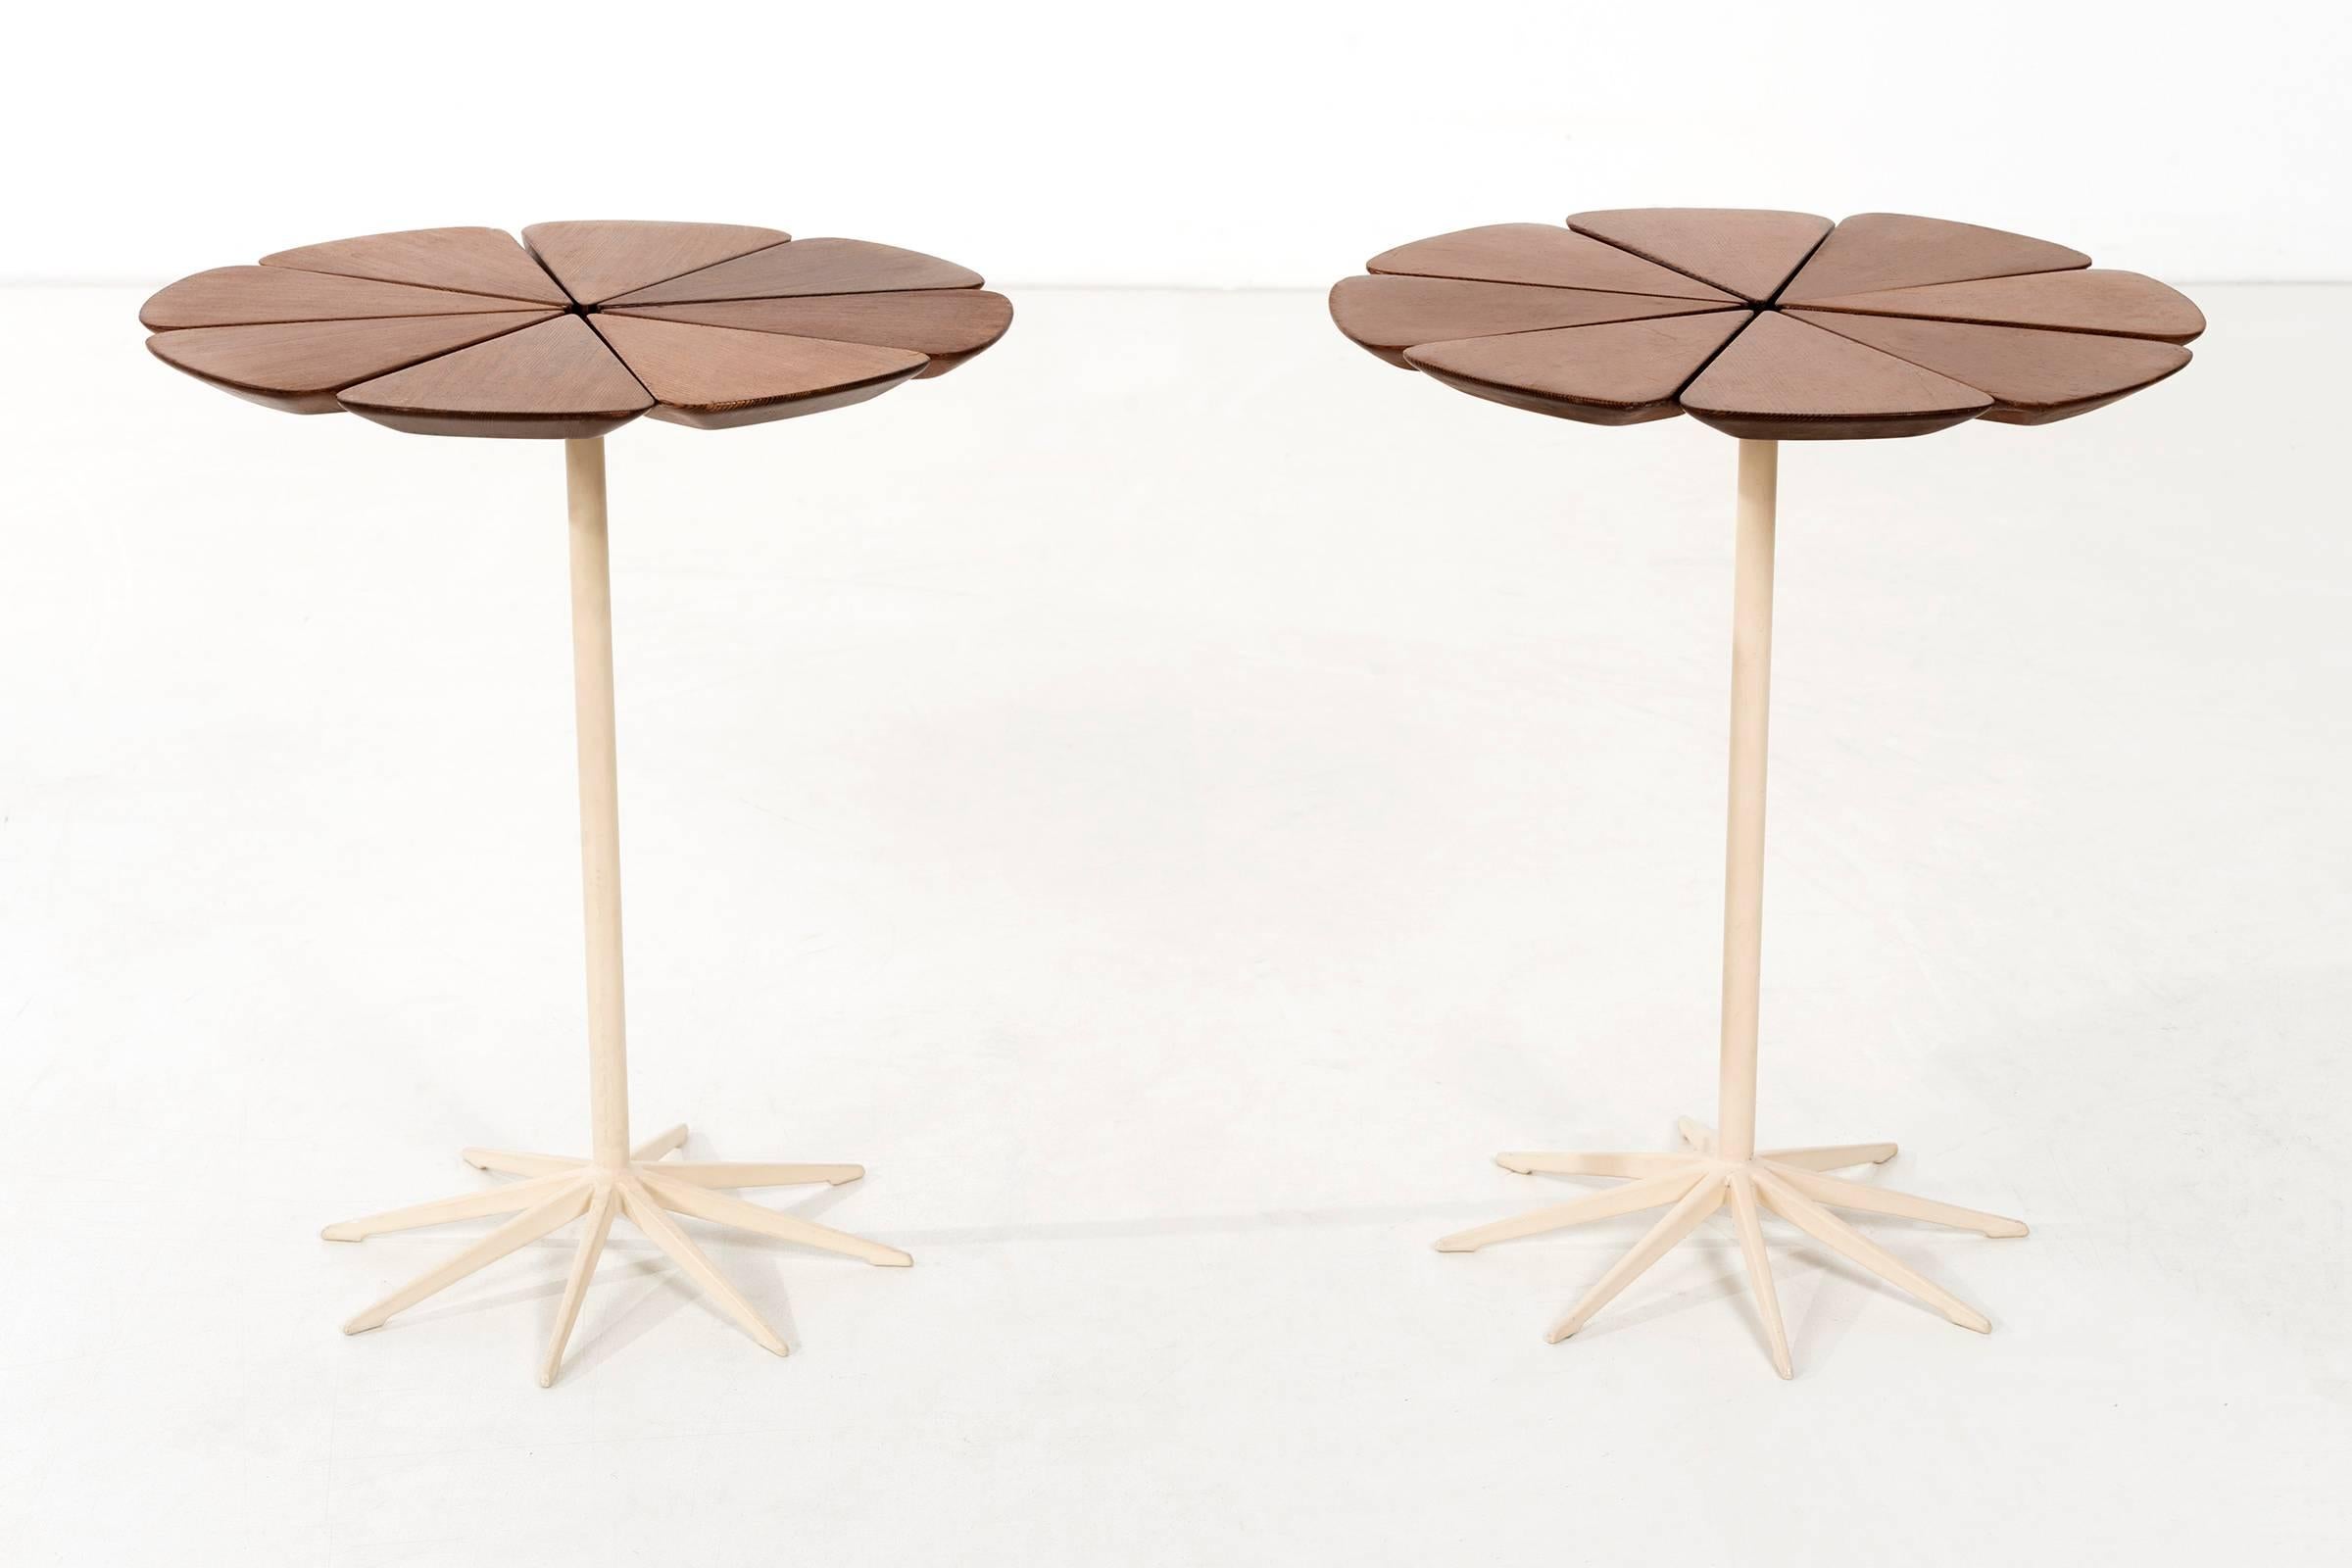 Schultz for Knoll indoor or outdoor tables, Schultz cites Queen Anne's Lace as his inspiration for these delicate tables with its flower-like top sprouting from the elegant pedestal base. Each redwood 